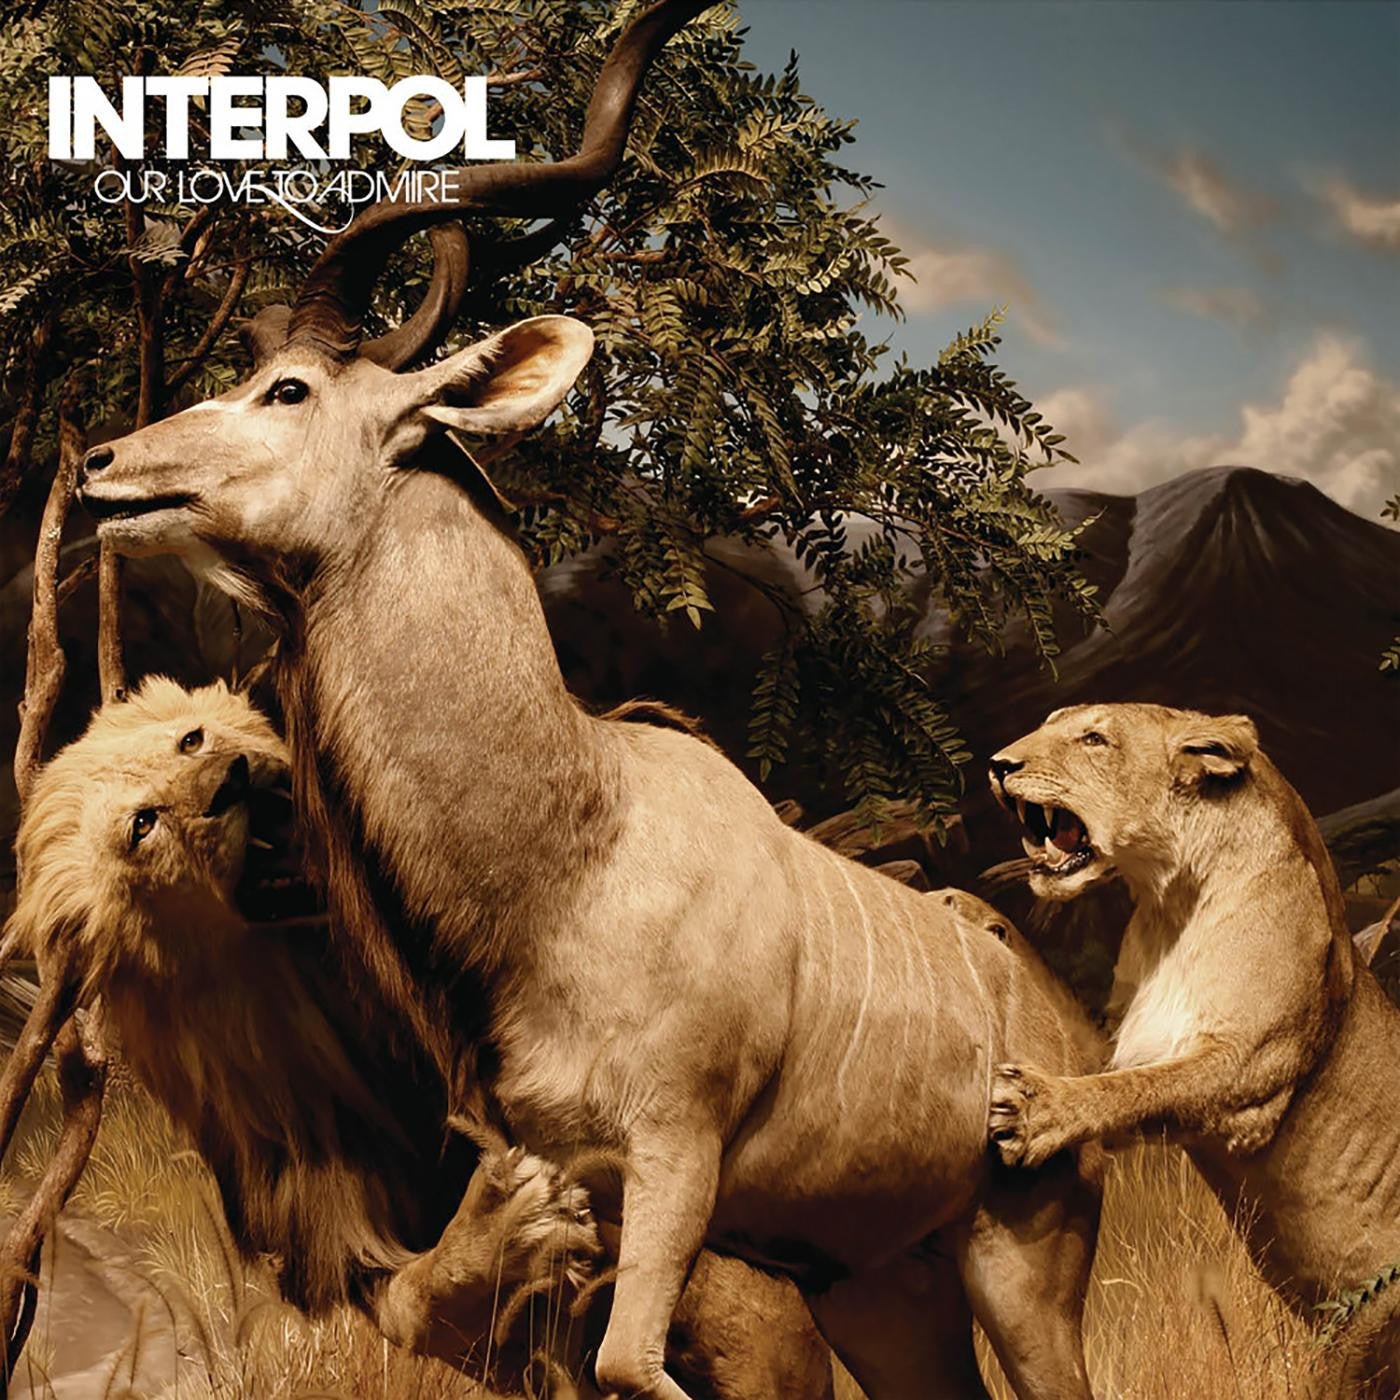 Interpol - Our Love to Admire (2LP, Gatefold) - 191401150415 - LP's - Yellow Racket Records